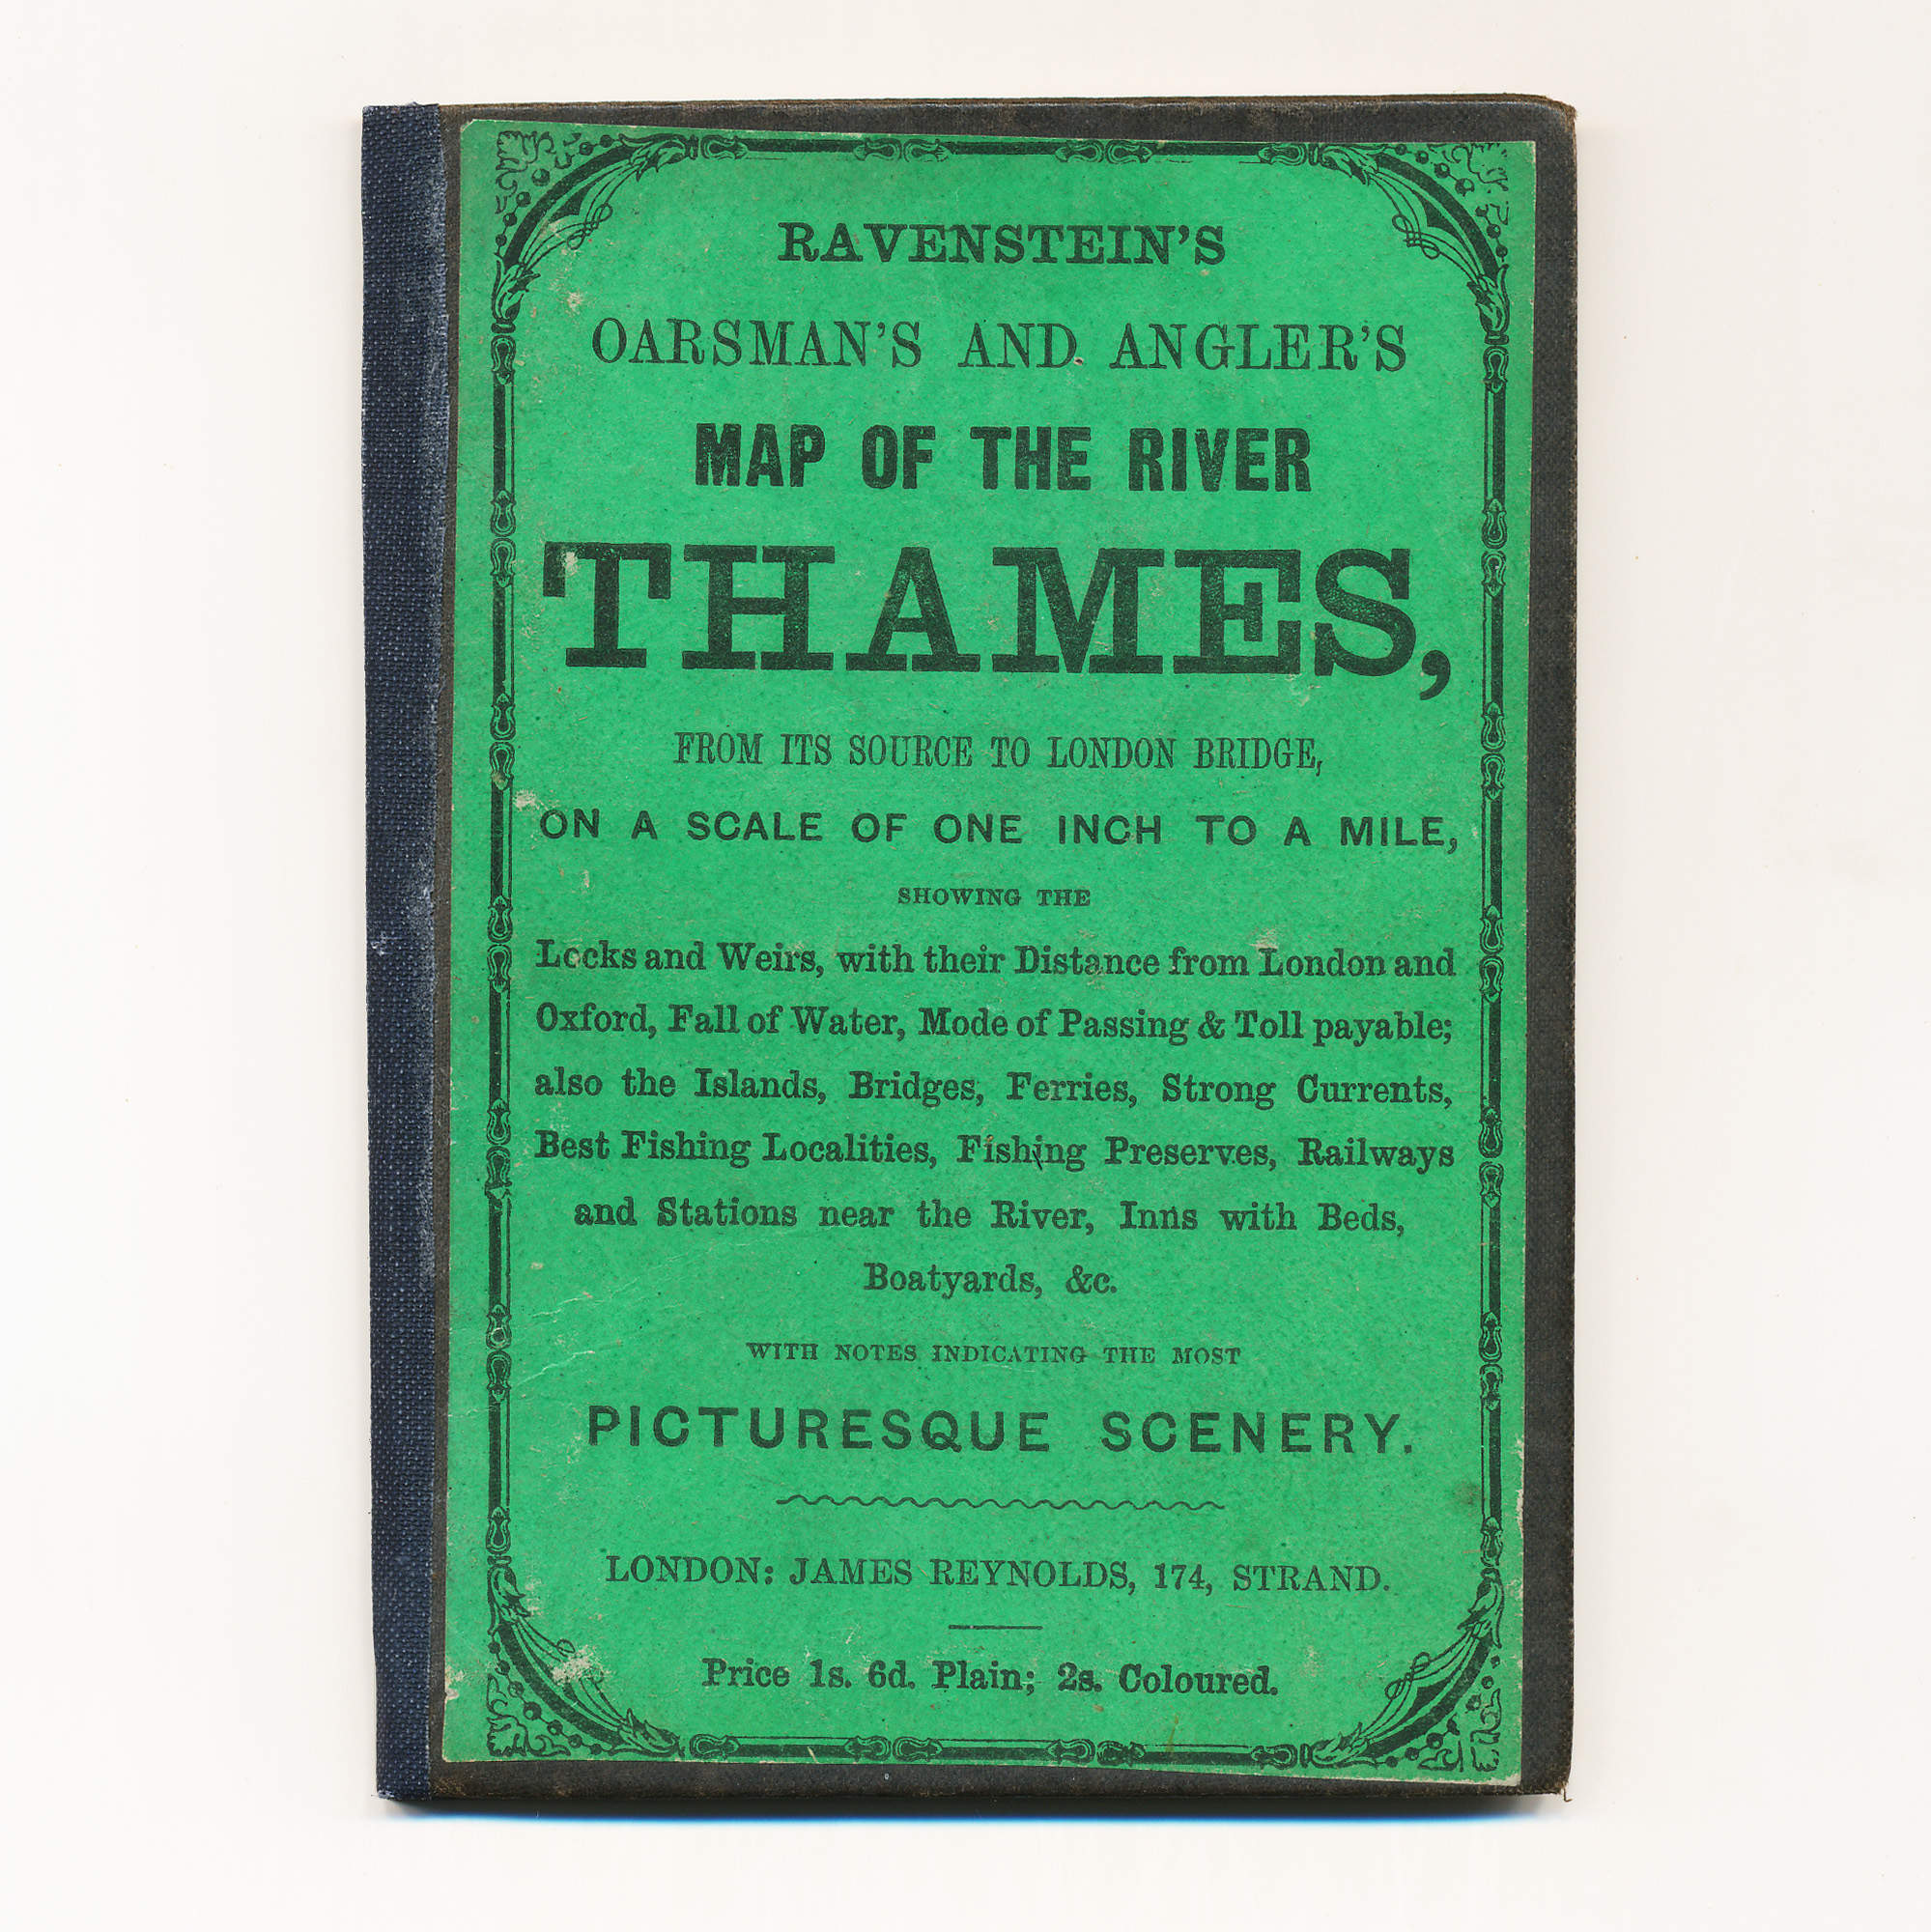 The Oarsman's and Angler's Map of the River Thames - , 